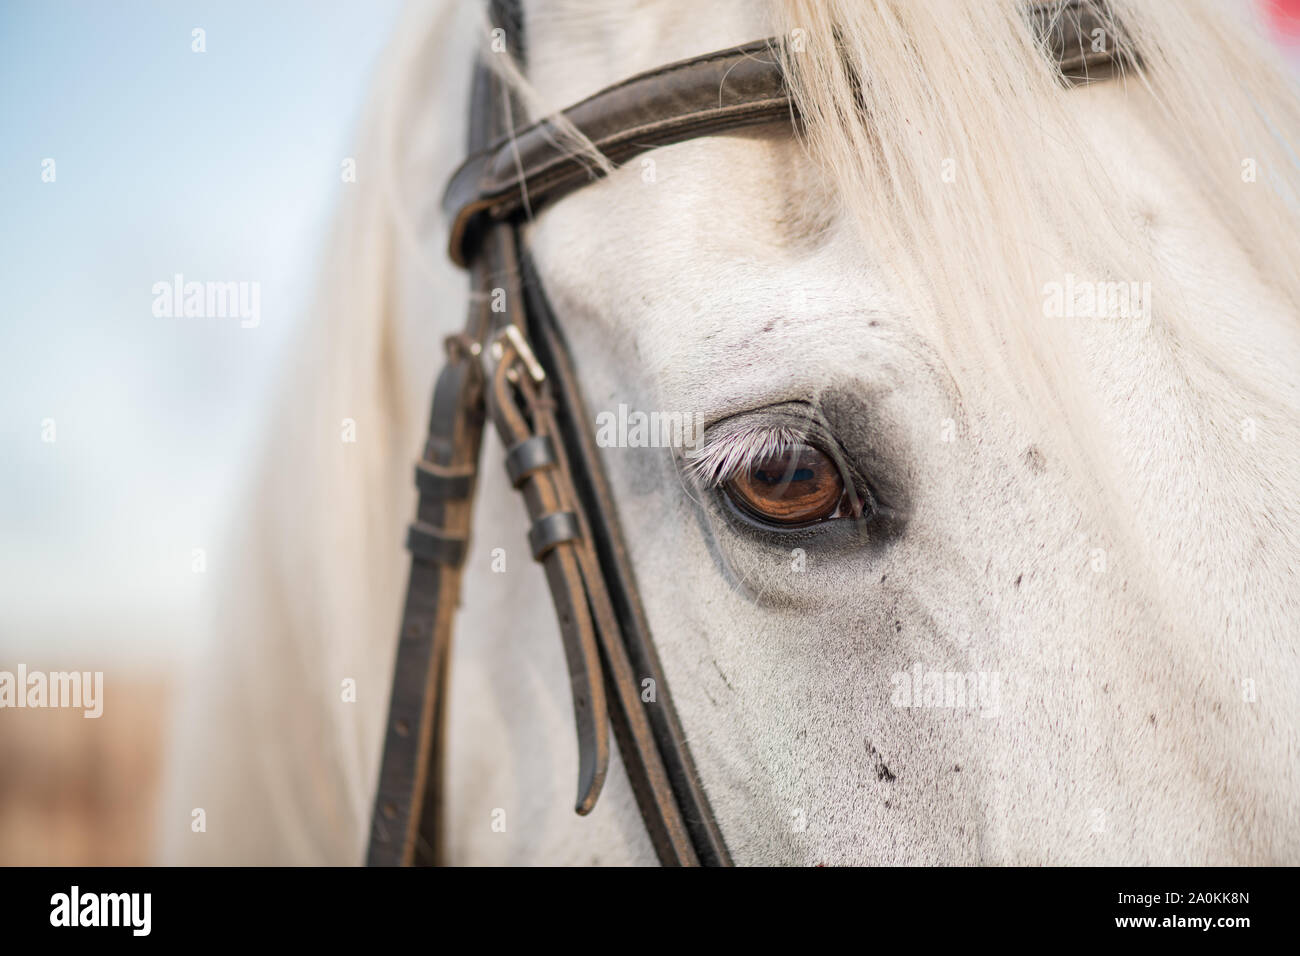 Right eye and mane of white purebred racehorse with bridles on muzzle Stock Photo